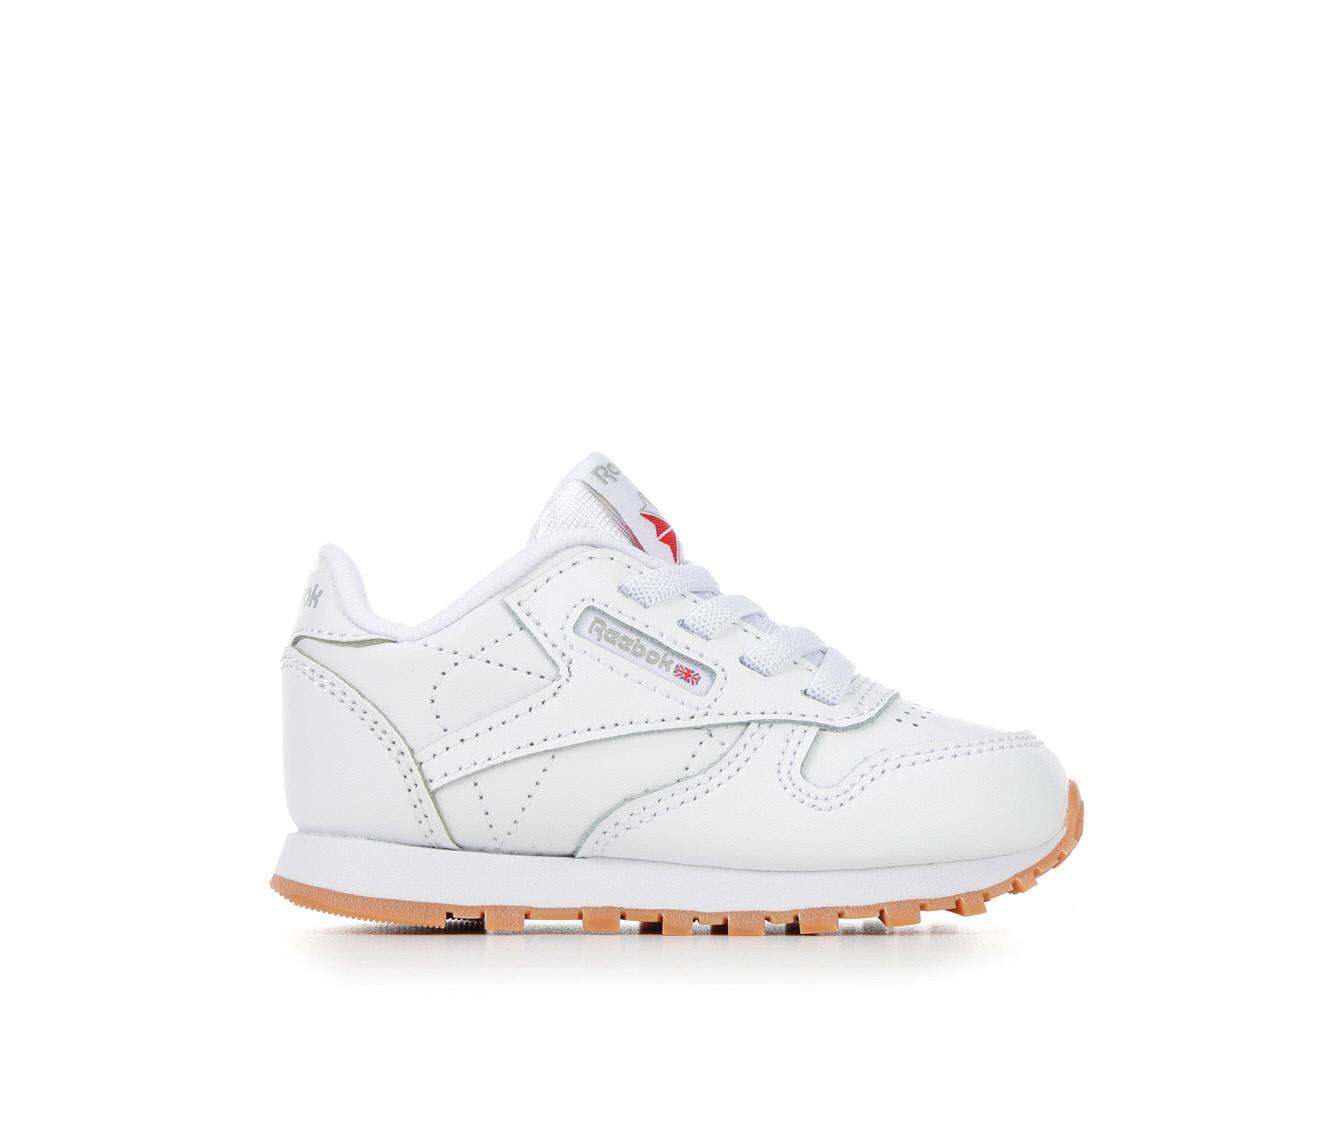 Kids' Reebok Infant & Toddler Classic Leather Sneakers